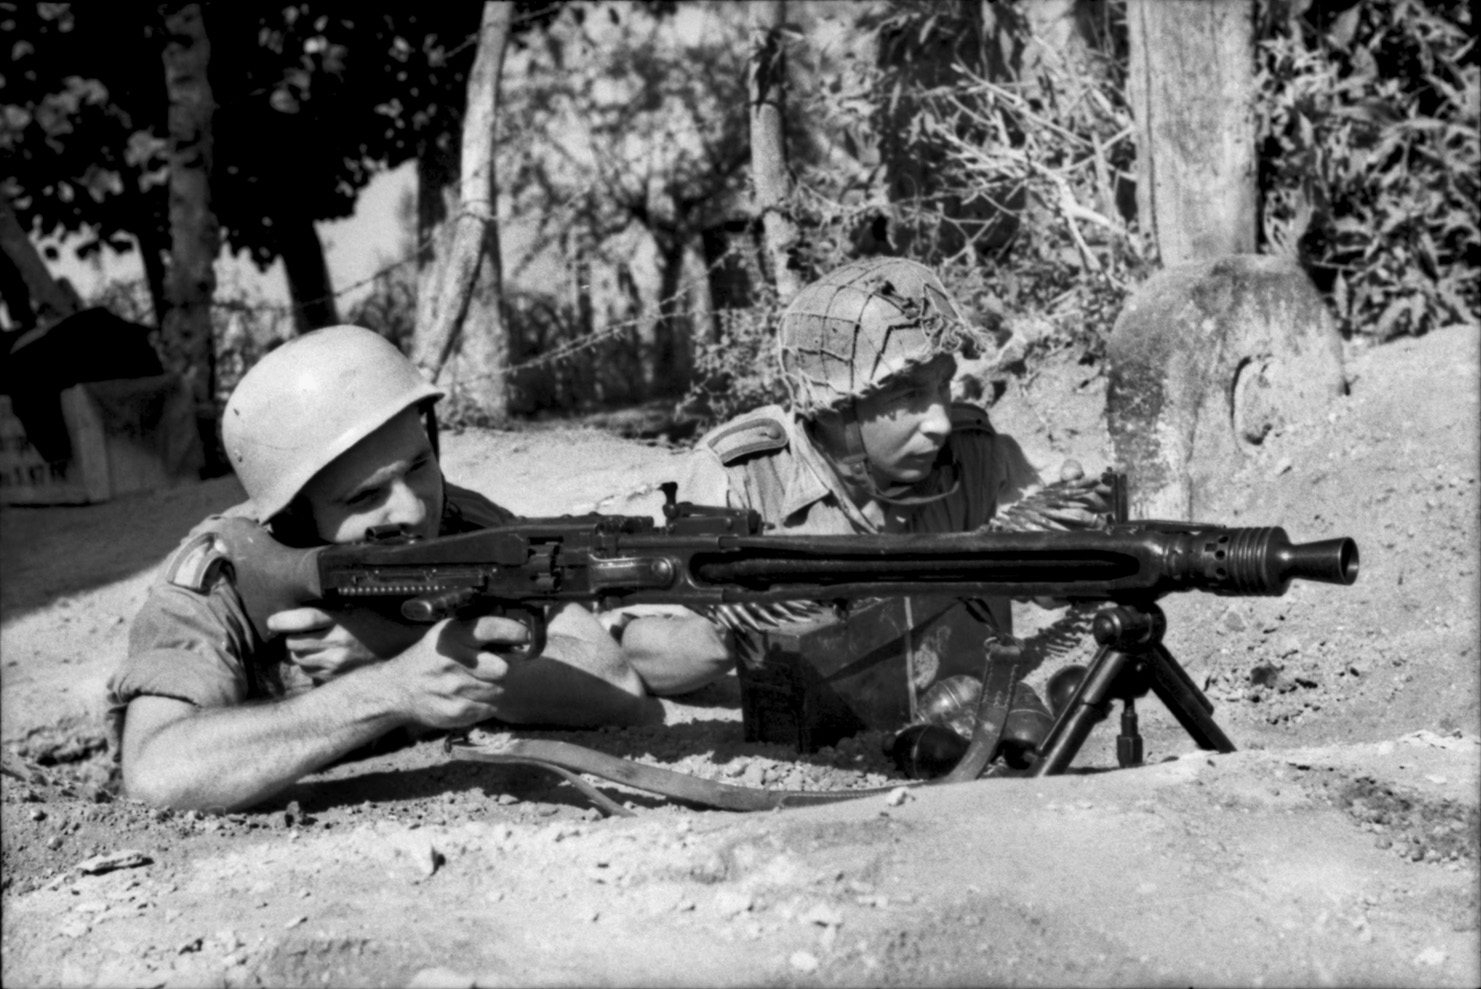 German paratroopers fire an MG 42. The Germans typically deployed the superb weapon in concealed positions so as to enfilade attacking enemy units.